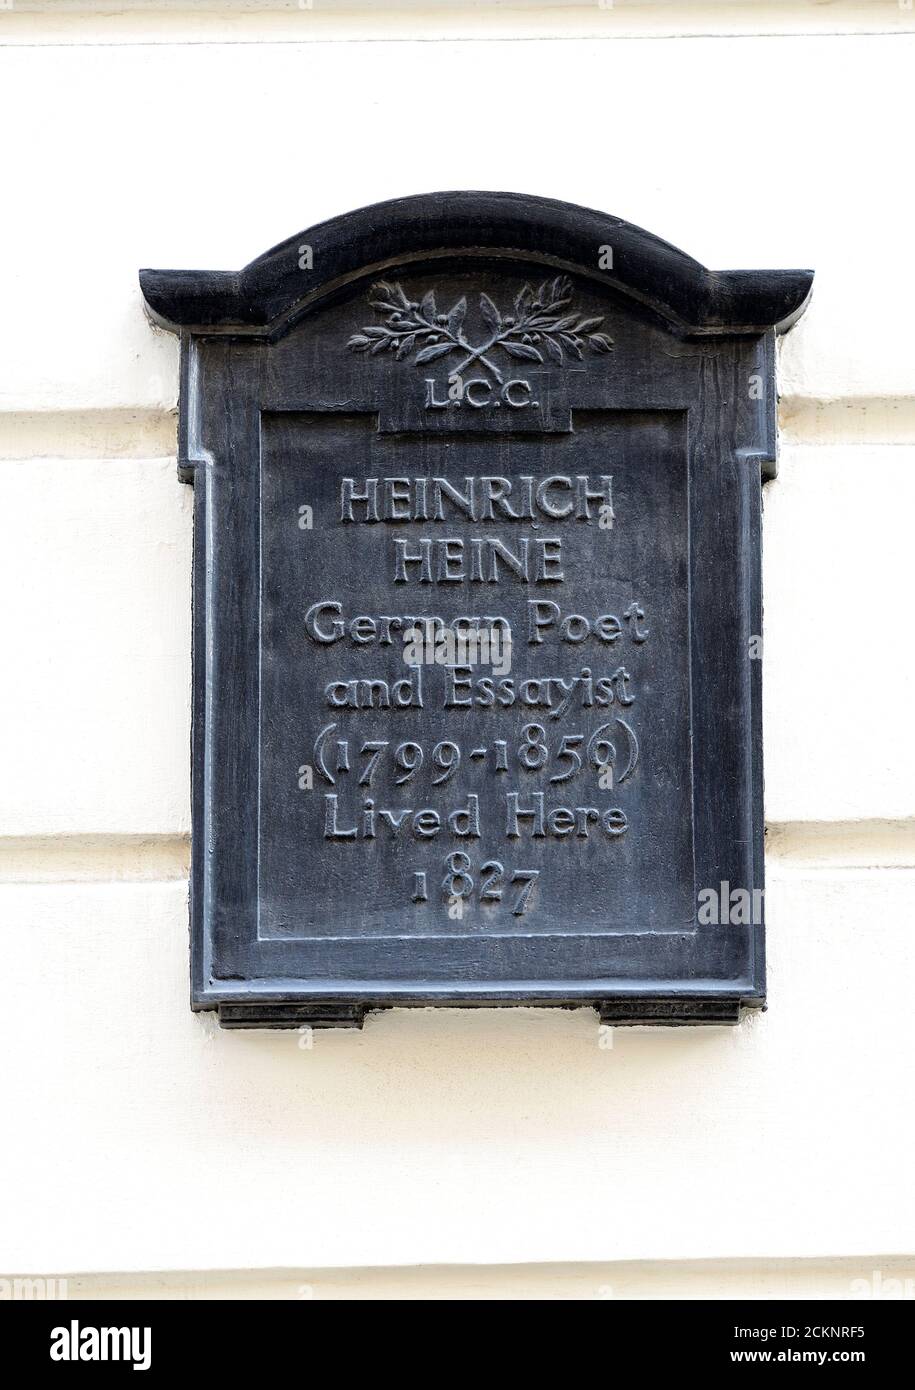 London, England, UK. Commemorative plaque. 'Heinrich Heine German poet and essayist (1799-1856) lived here 1827' at 32 Craven Street, Westminster, WC2 Stock Photo